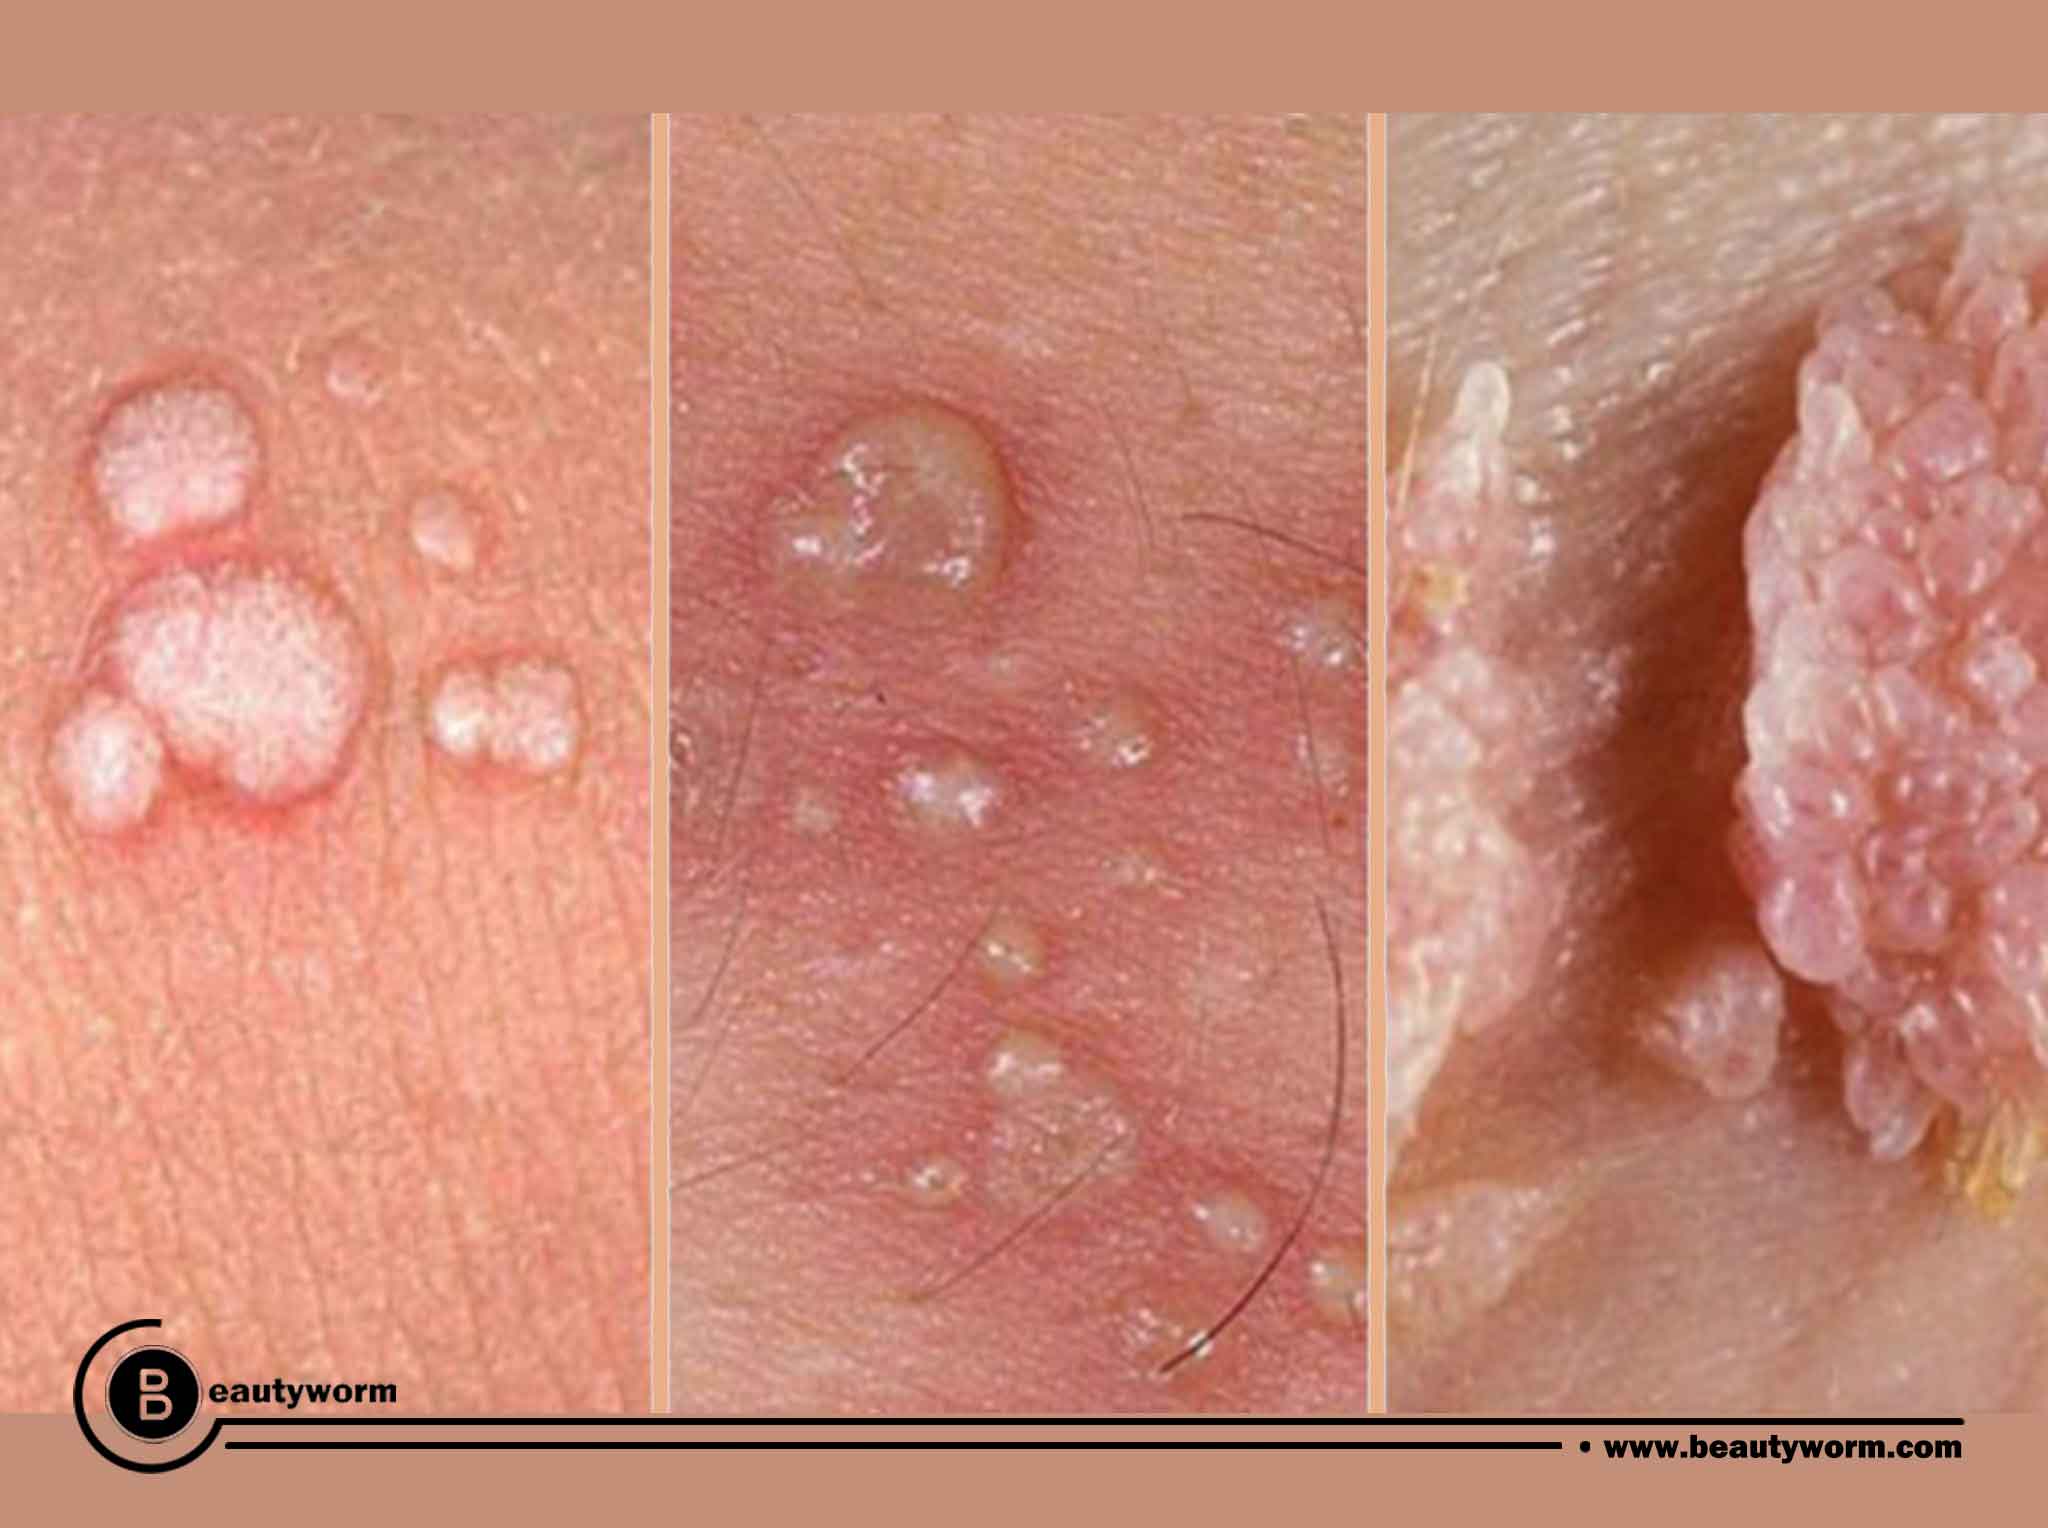 What are the symptoms of HPV?(The warts)